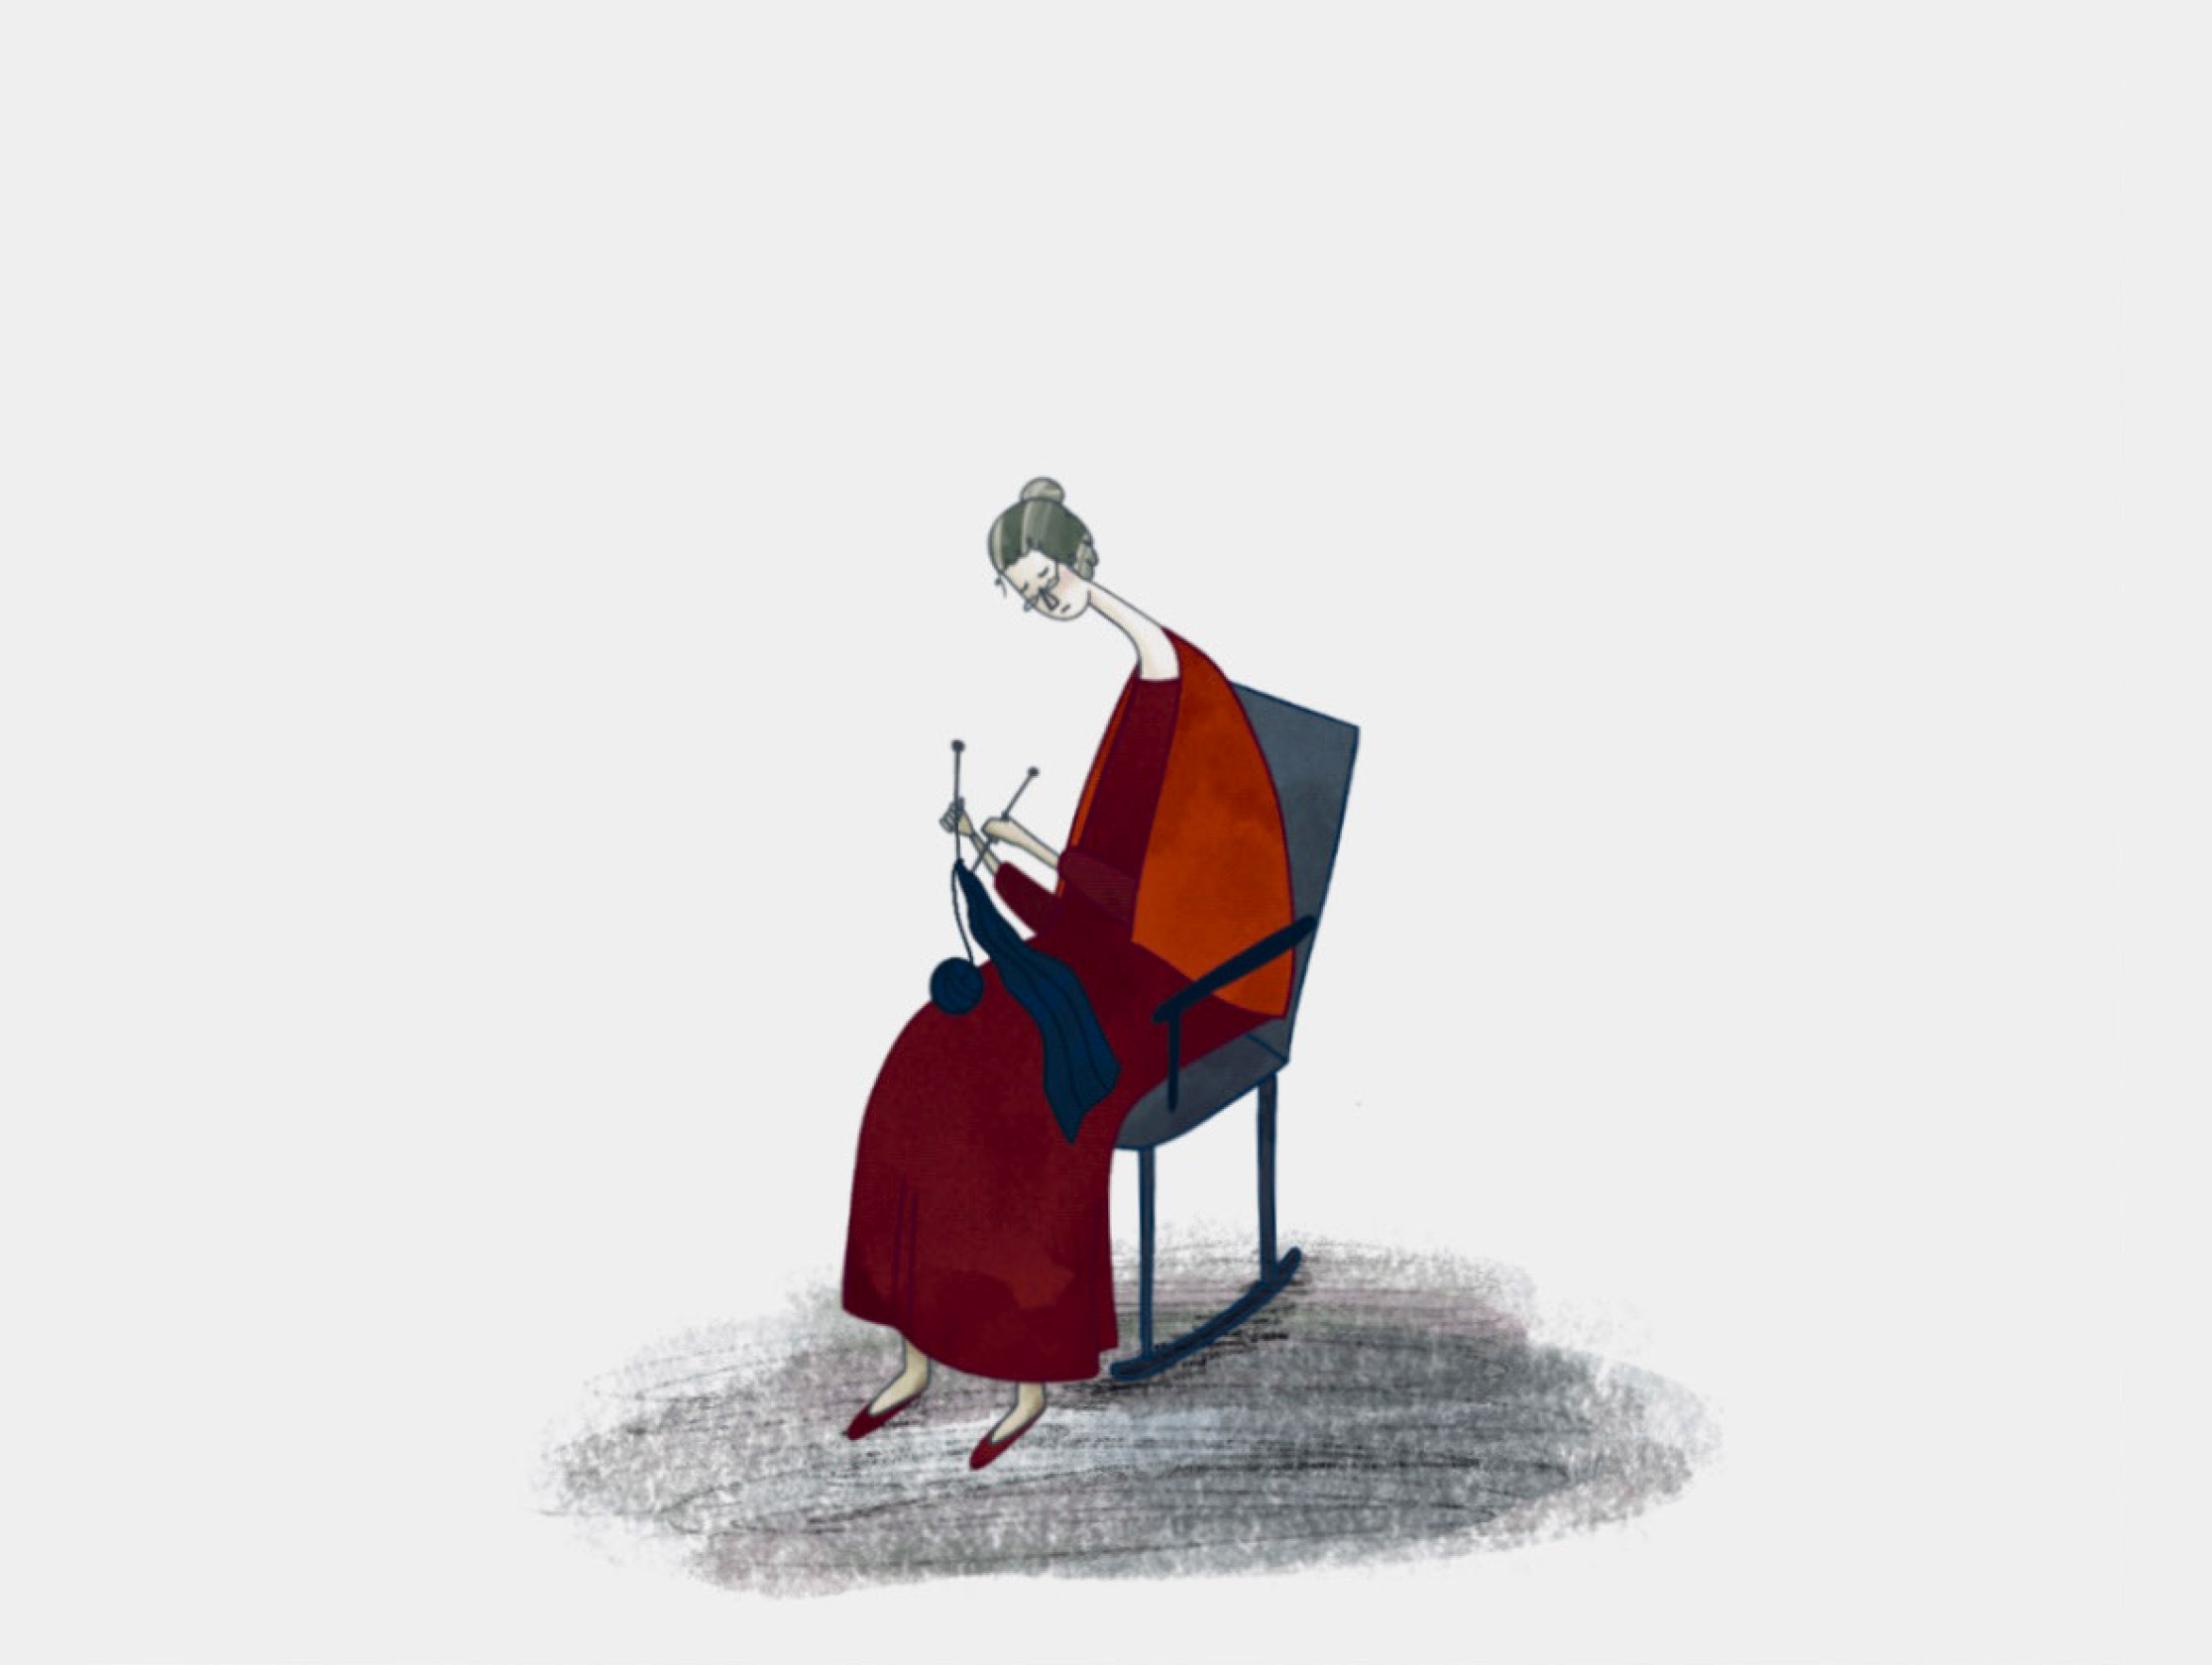 Illustration of a lady knitting on a rocking chair, from a short animation